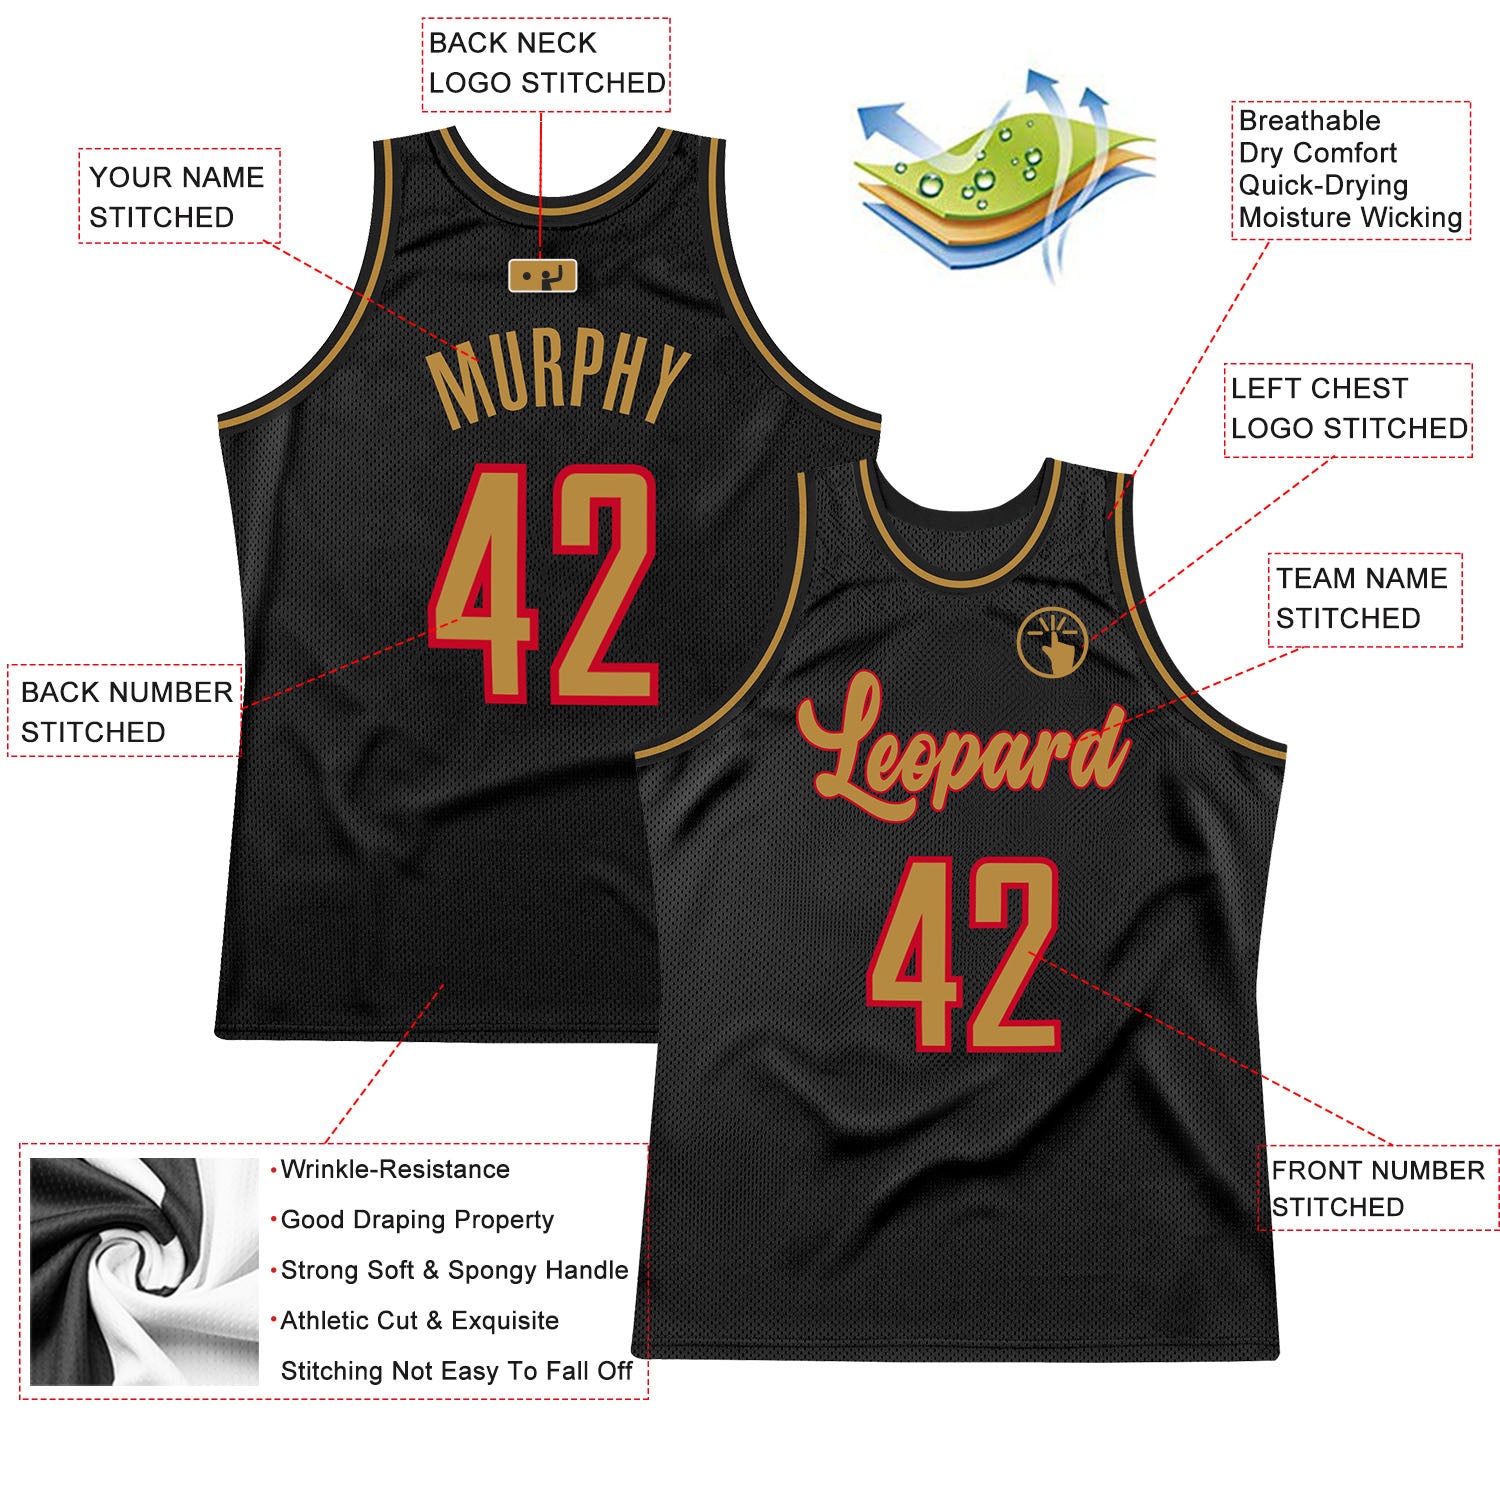 Custom Black Old Gold-Red Authentic Throwback Basketball Jersey